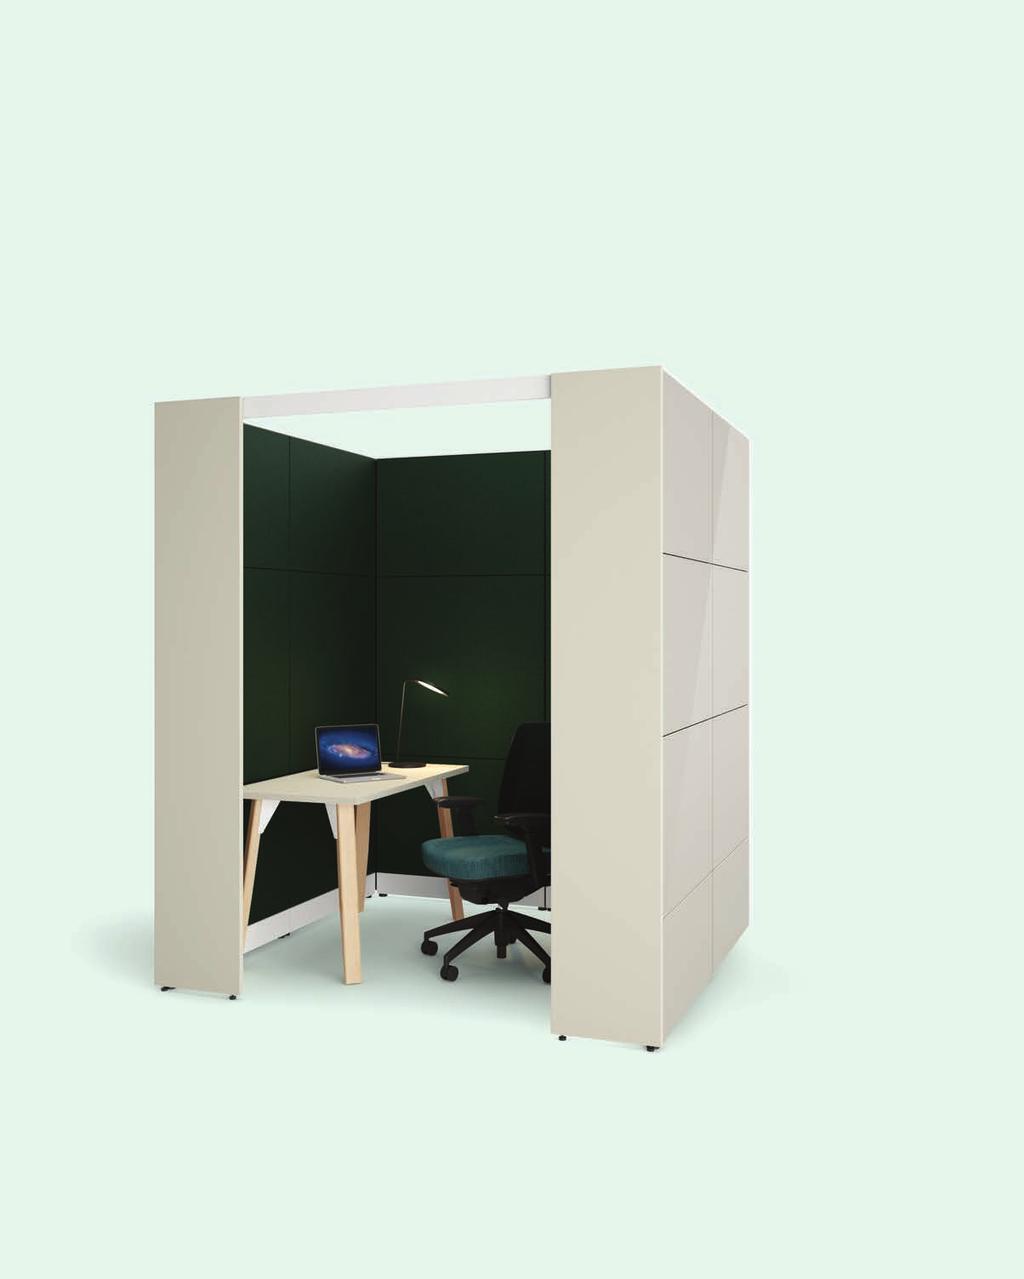 Axel semi-enclosed pavilion office for individual work Willow Grey laminate, Sand acrylic, Polar White enamel finish and Forest Grade A fabric.